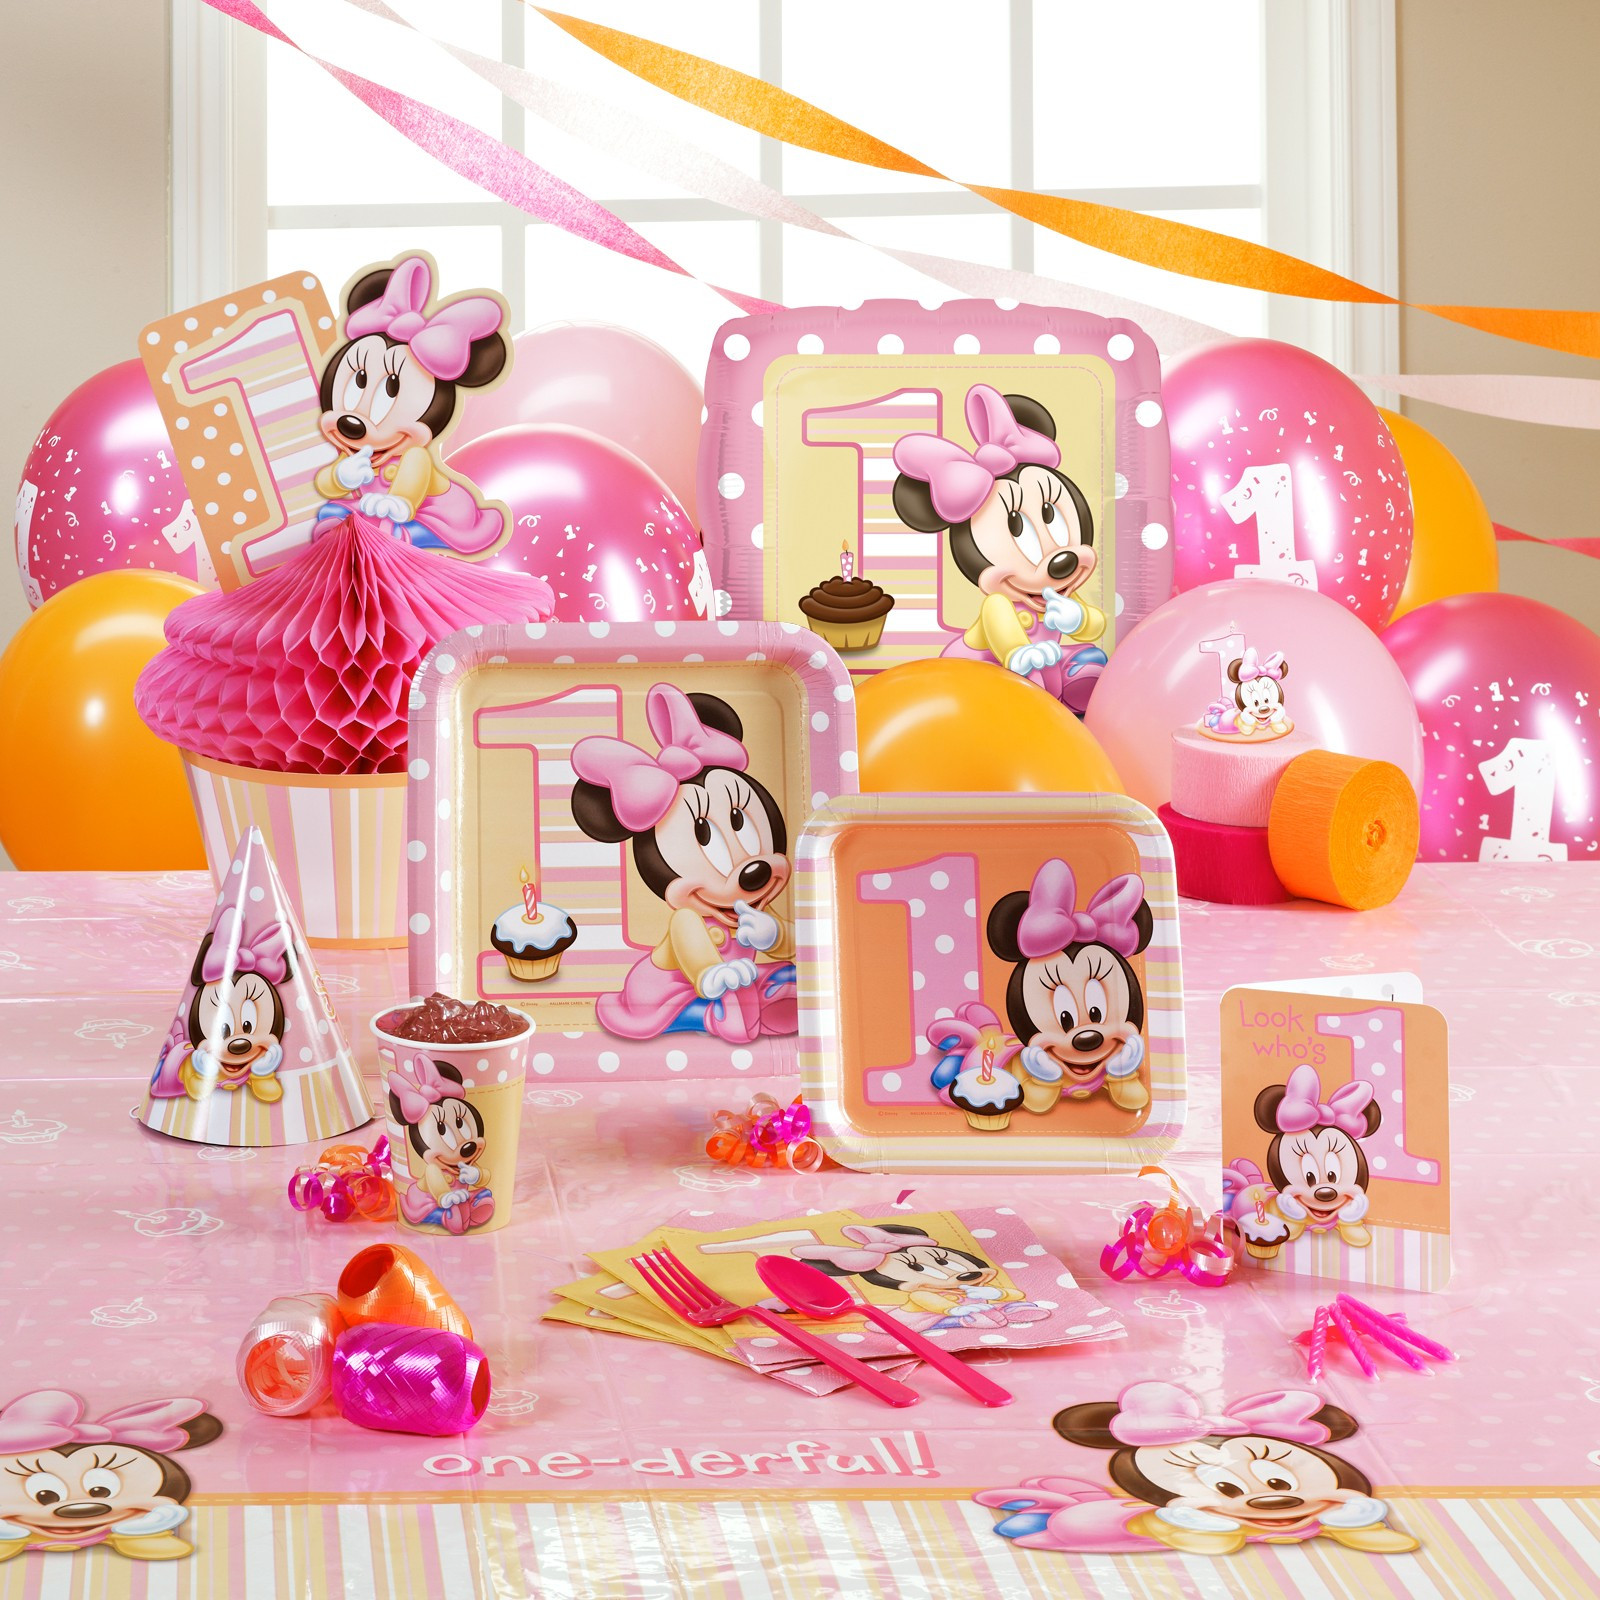 Minnie Mouse First Birthday Decorations
 Minnie Mouse 1st Birthday Party